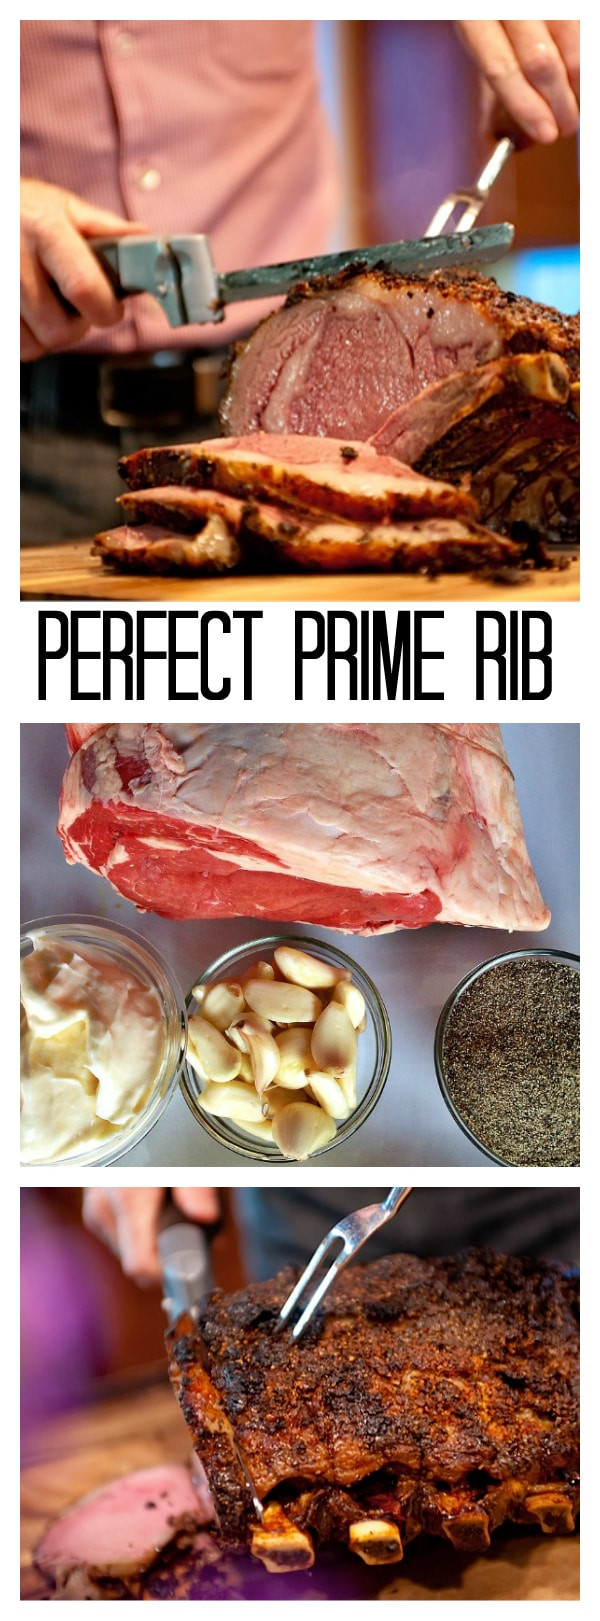 Side Dishes For Prime Rib Christmas
 Holiday Delicious Crusted Pepper Prime Rib Recipe